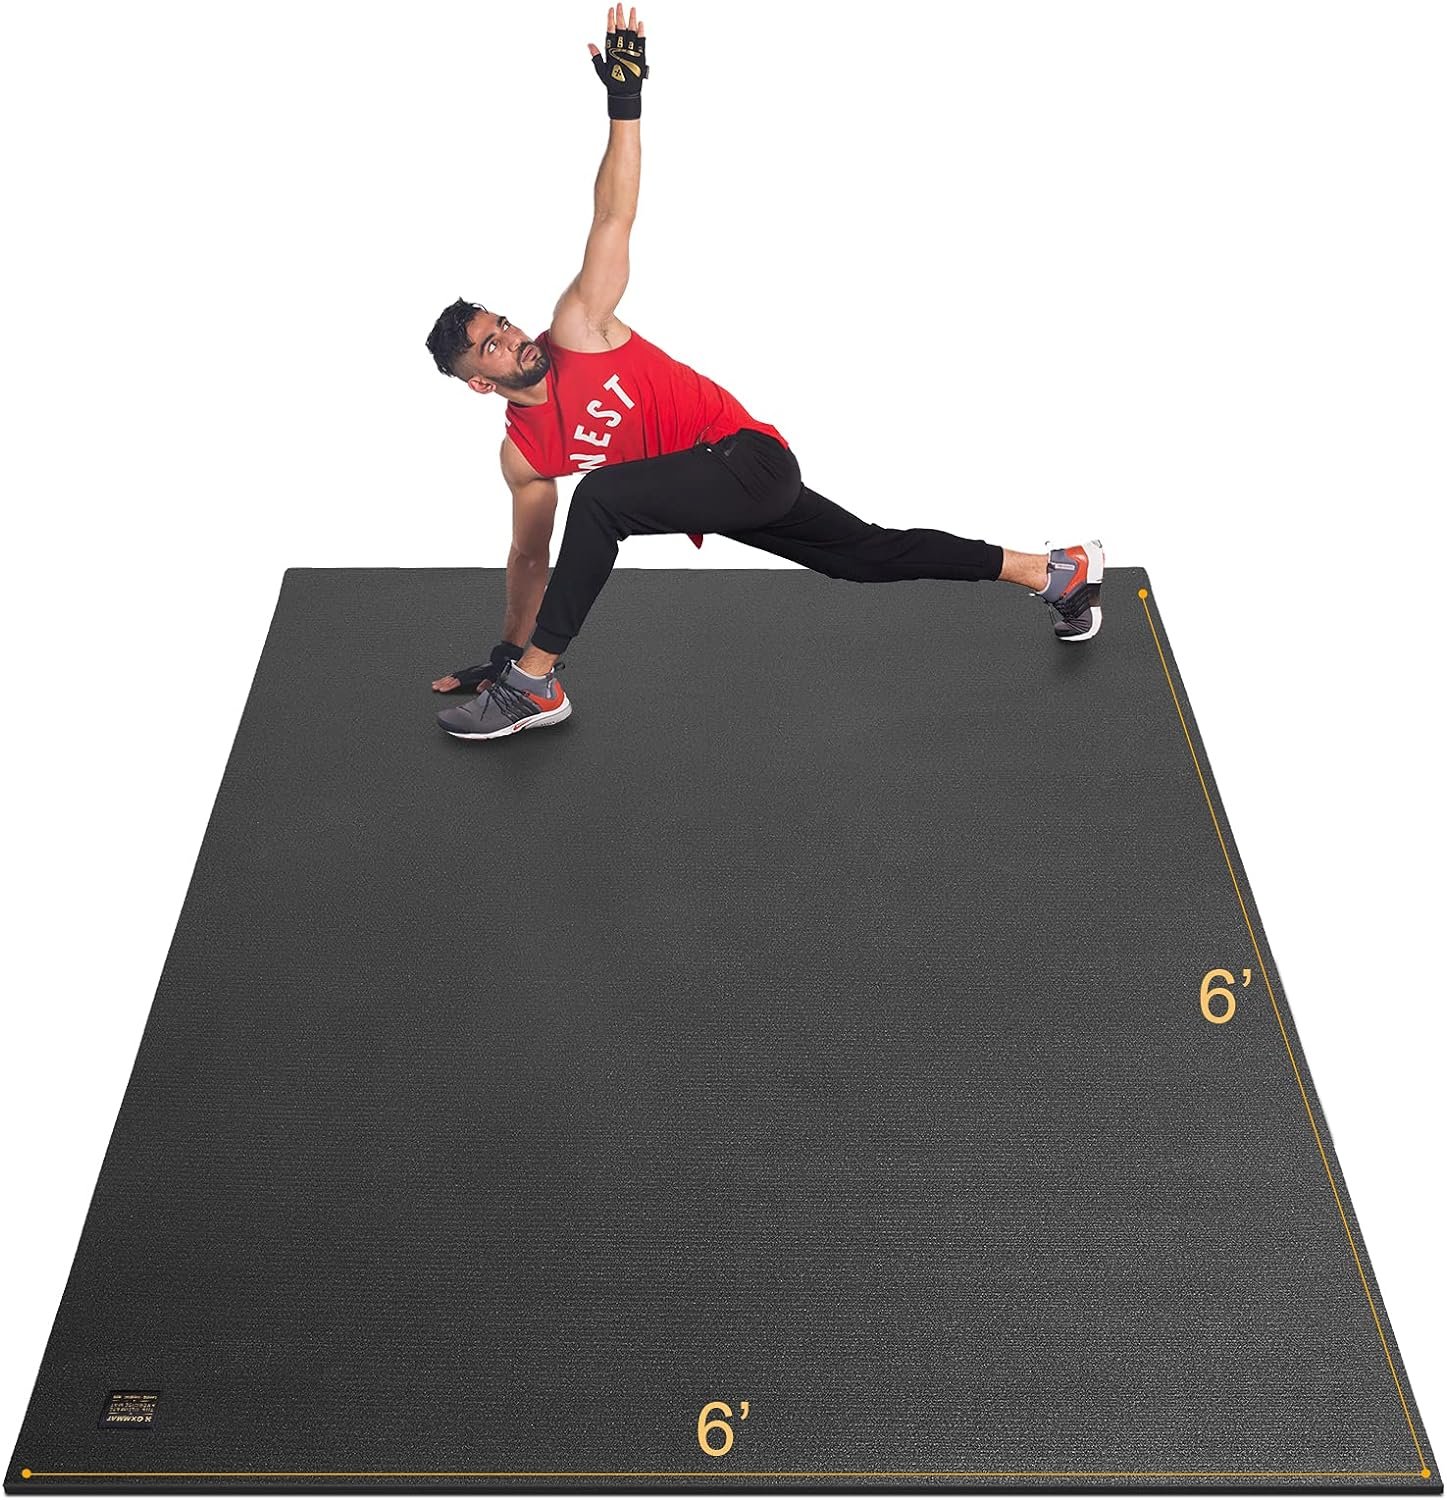 GXMMAT Large Exercise Mat Review